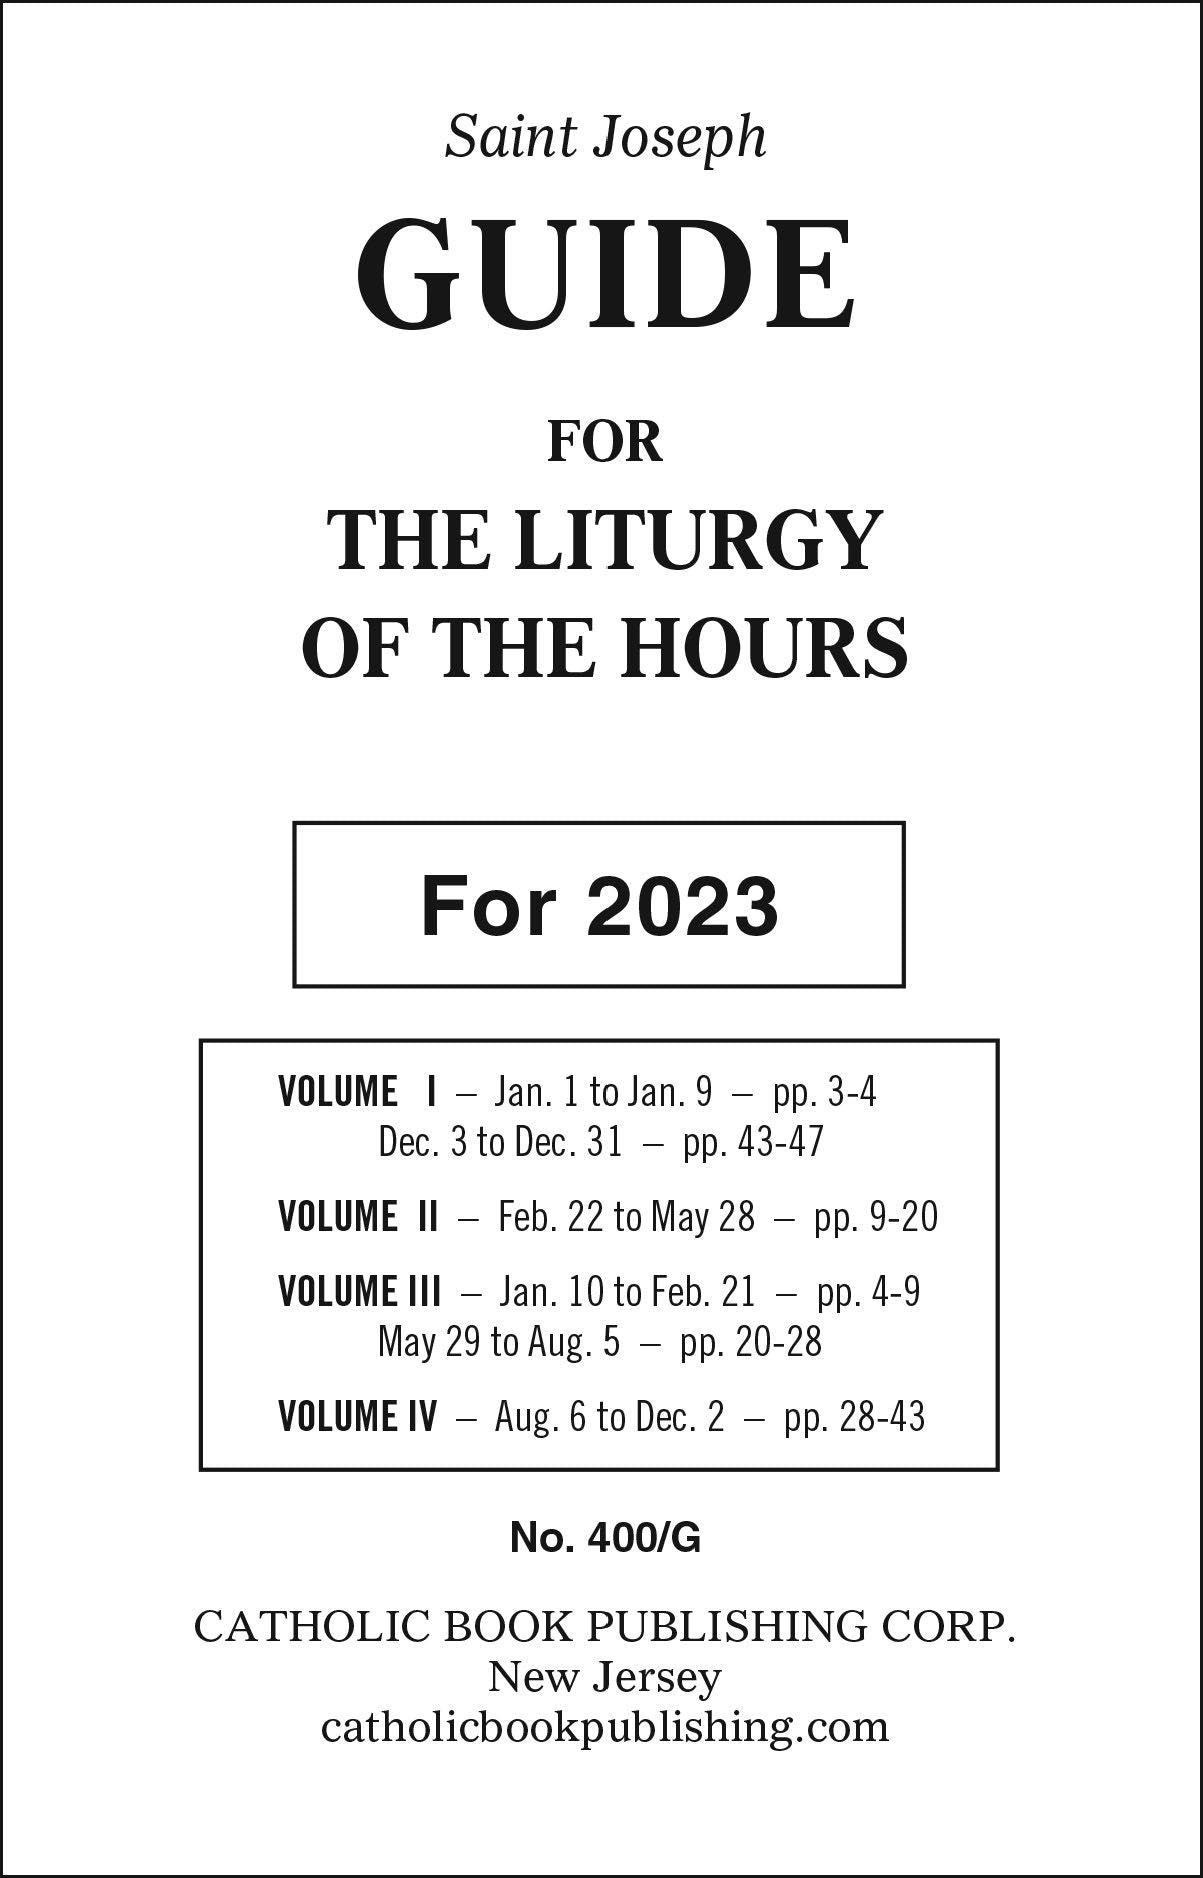 Guide for Liturgy of the Hours 2023